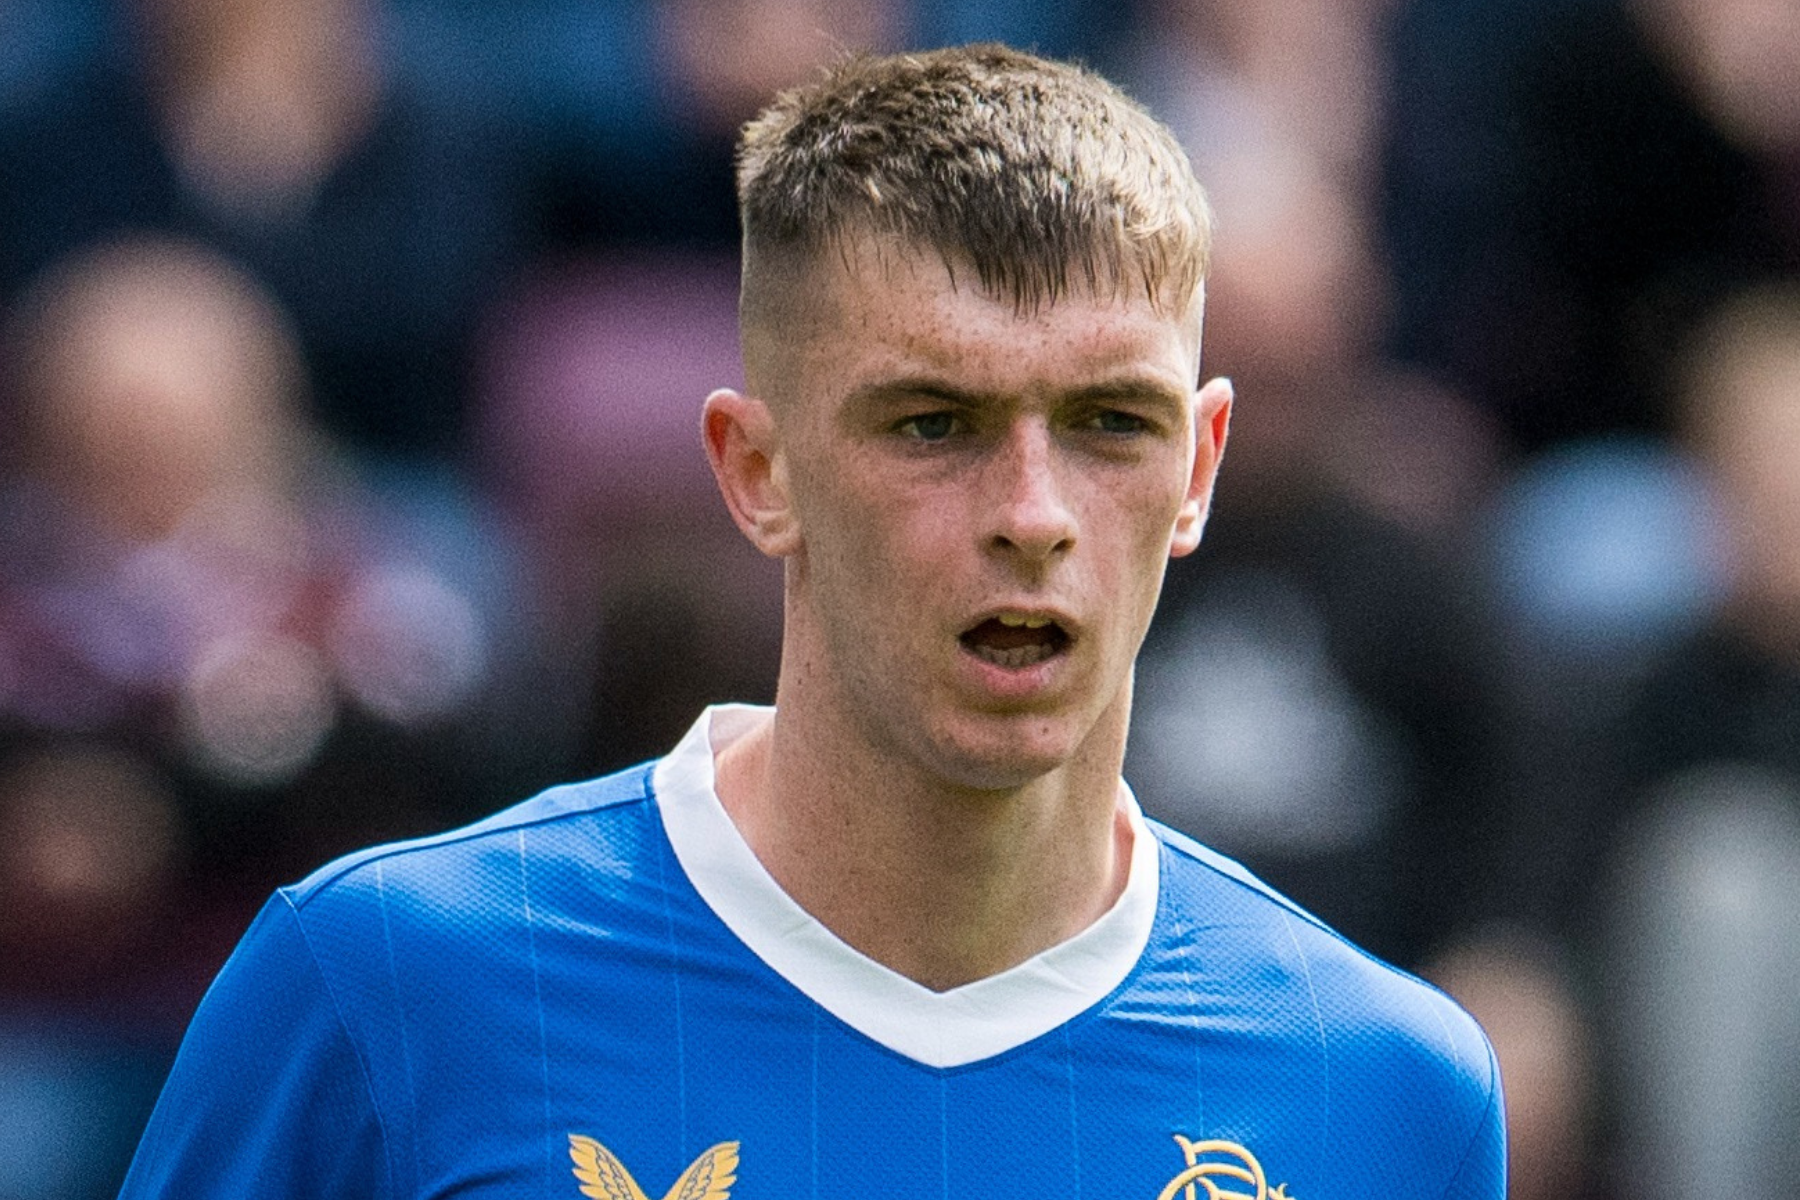 Rangers youngster Cole McKinnon 'could be set' for loan move to Partick Thistle